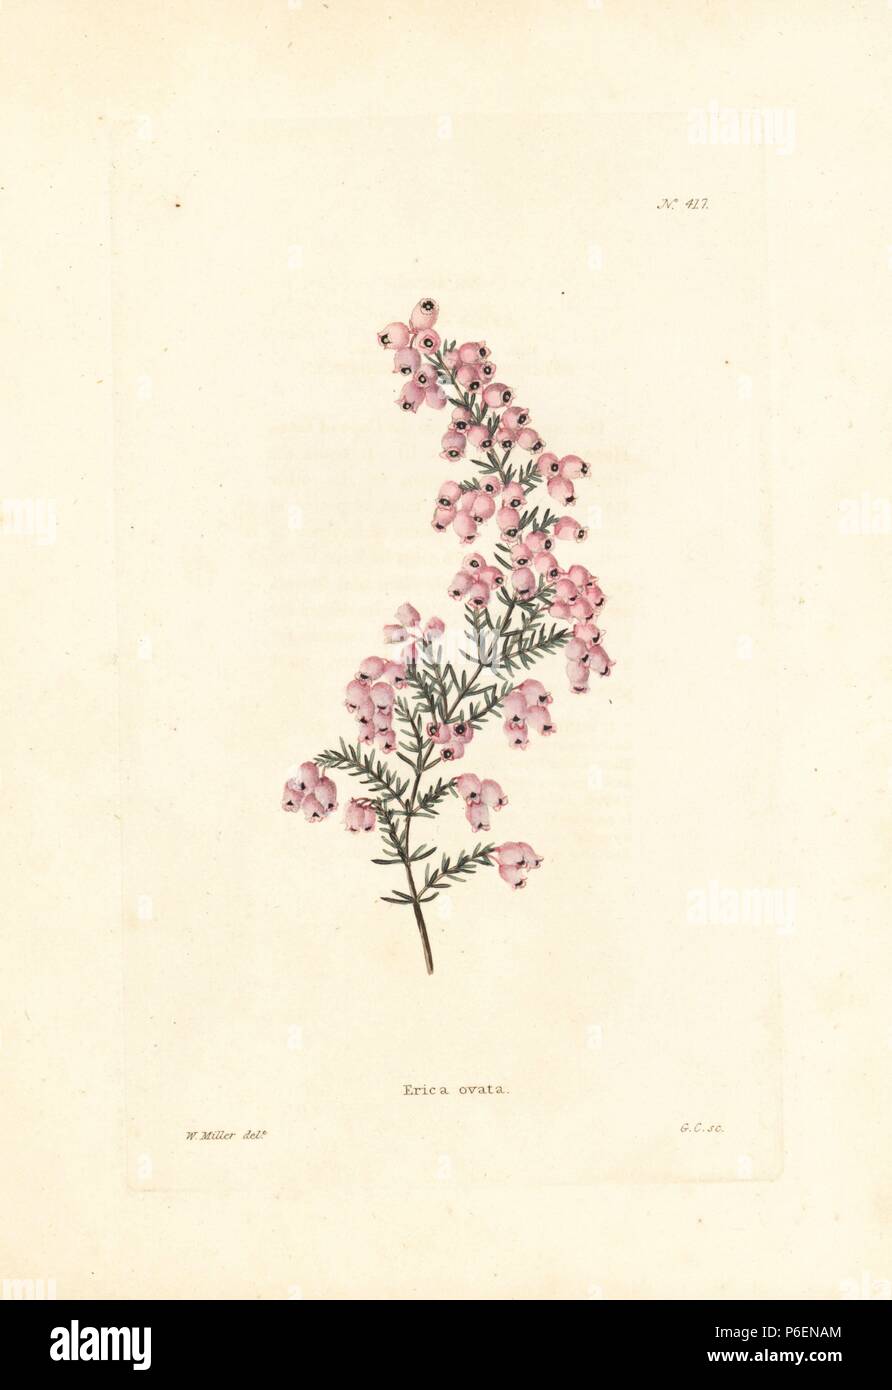 Hairy-flower heath, Erica hirtiflora, native to South Africa. Handcoloured copperplate engraving by George Cooke from an illustration by W. Miller from Conrad Loddiges' Botanical Cabinet, London, 1810. Stock Photo